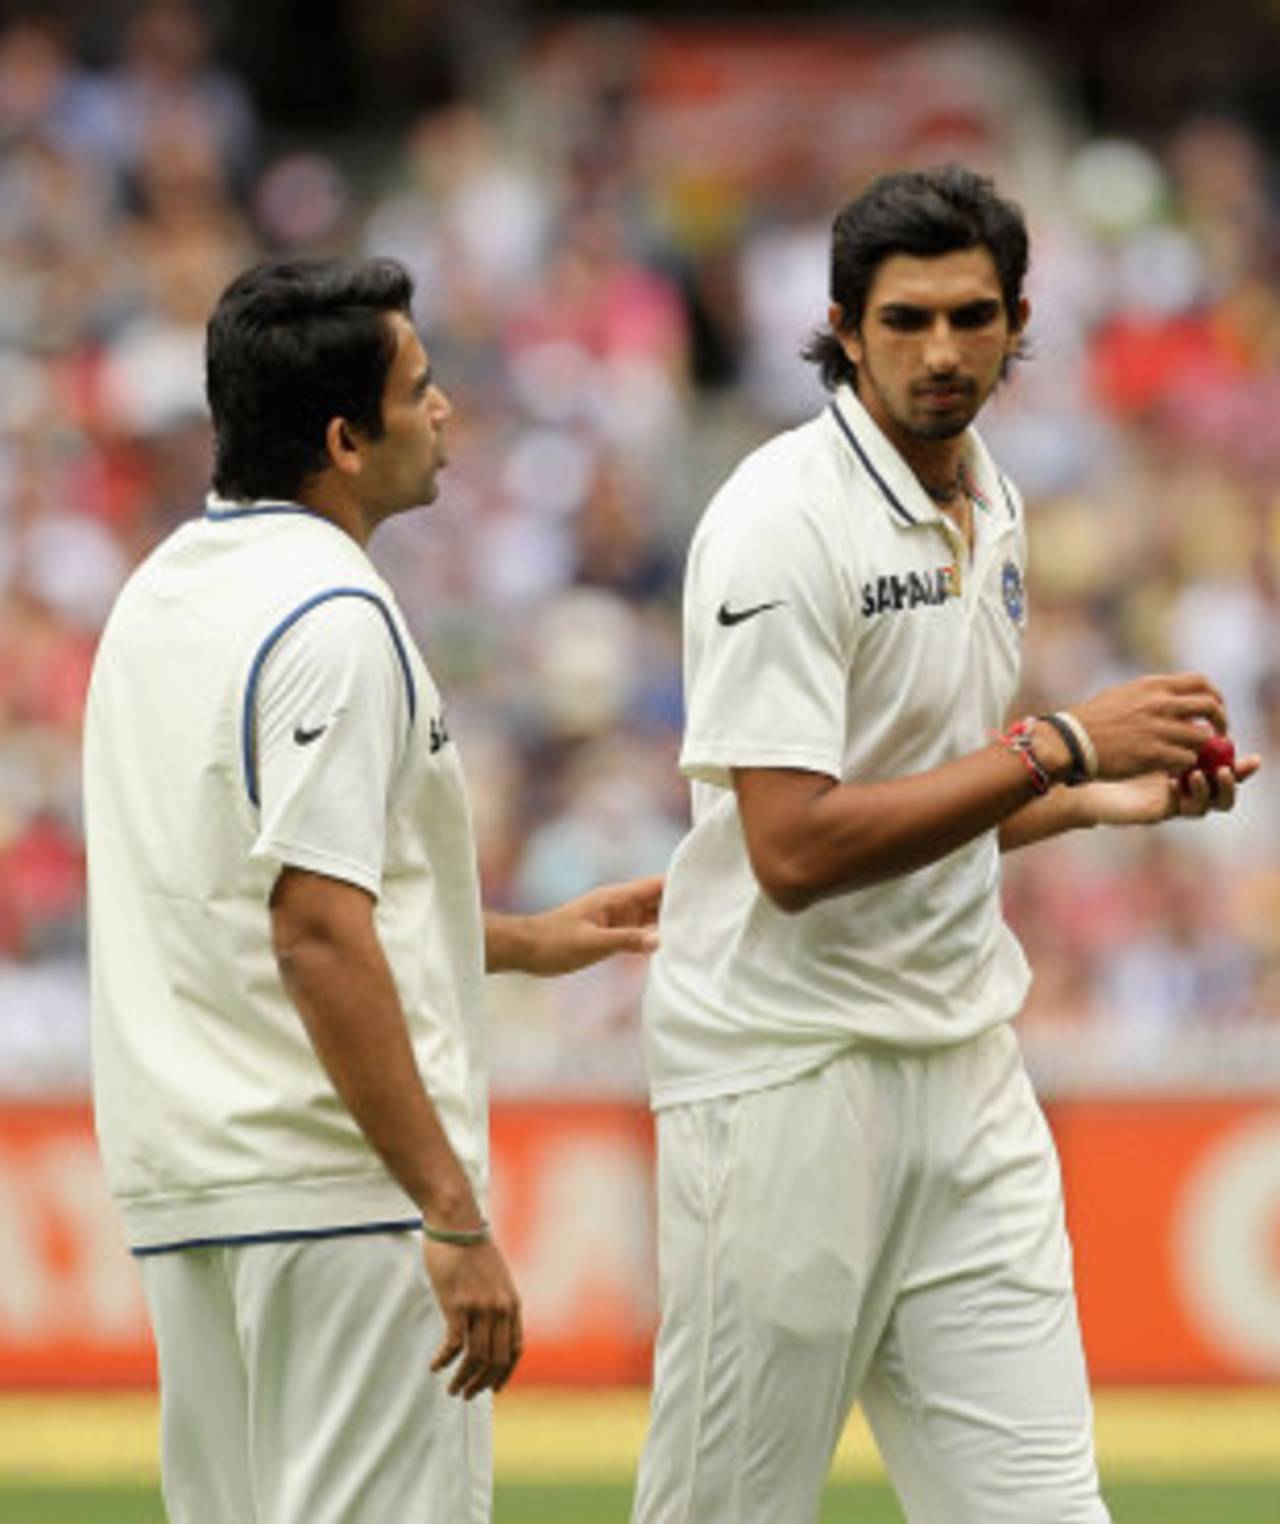 Ishant is expected to take over from Zaheer as the leader of India's attack but technical deficiencies hold him back&nbsp;&nbsp;&bull;&nbsp;&nbsp;Getty Images